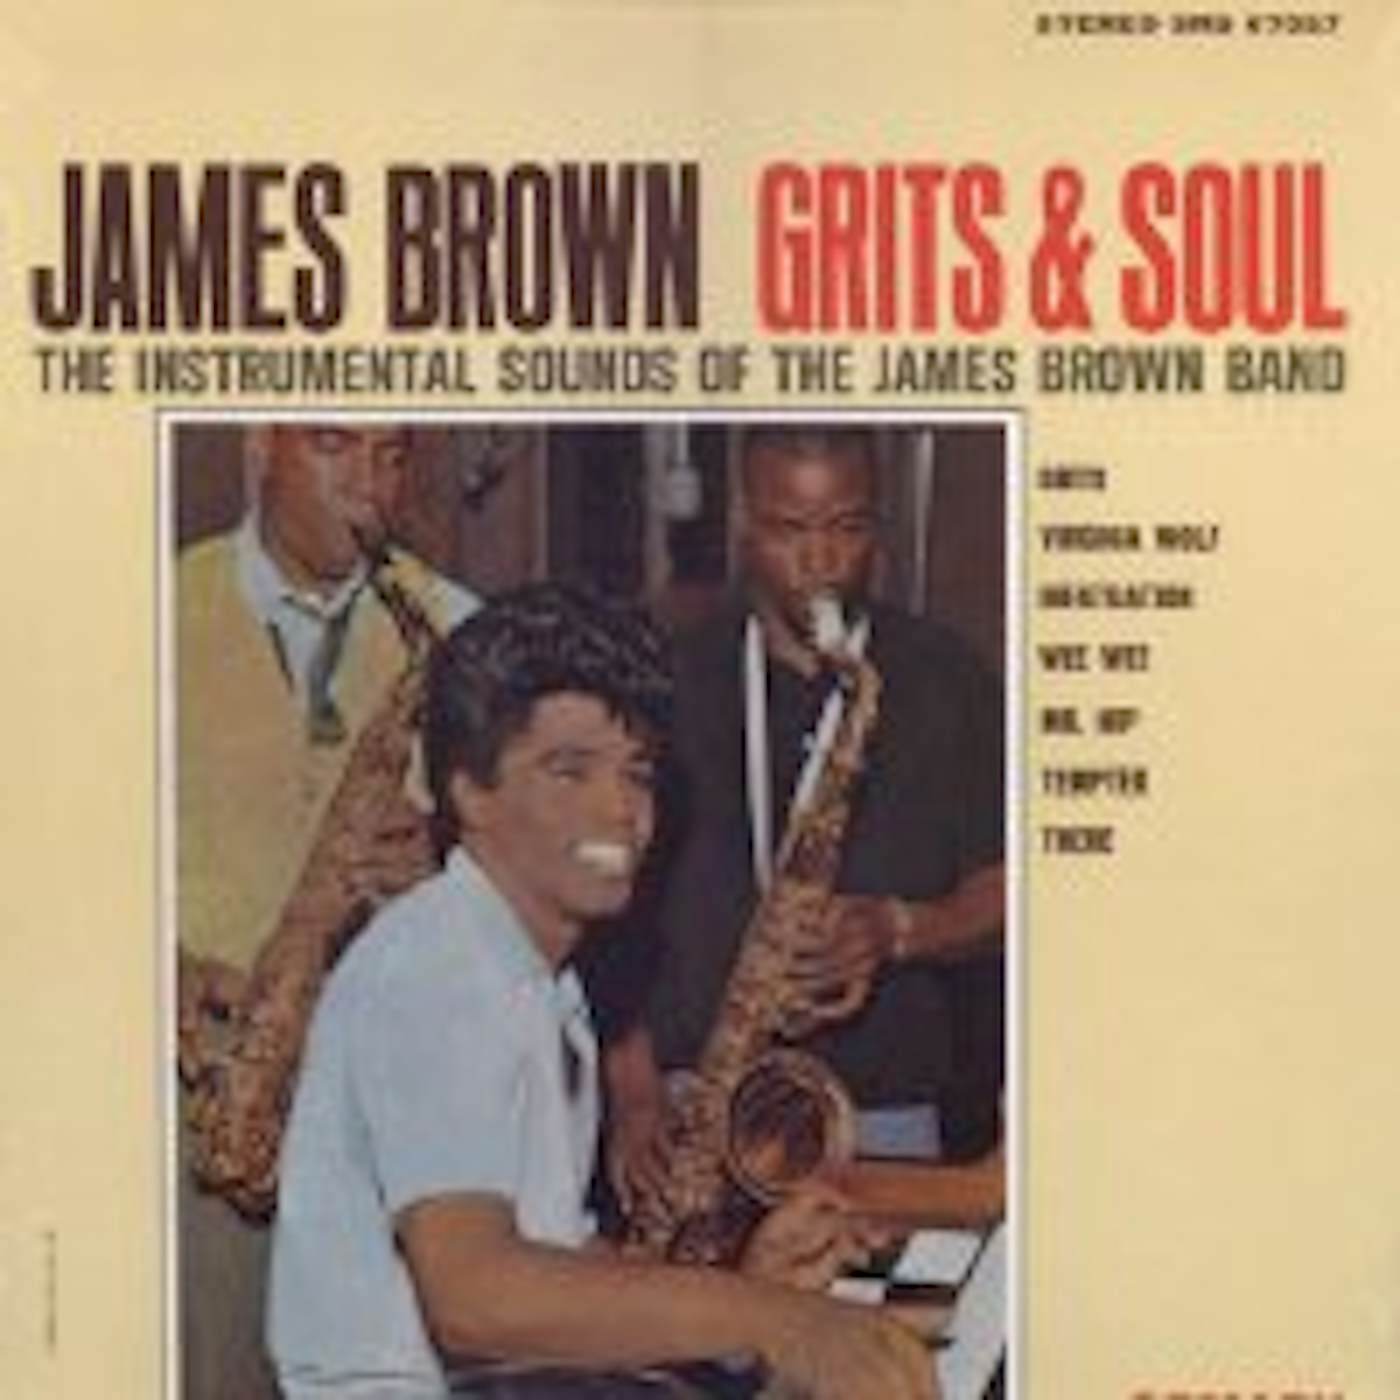 Grits MAKE A SOUND (LIKE JAMES BROWN) Vinyl Record - UK Release